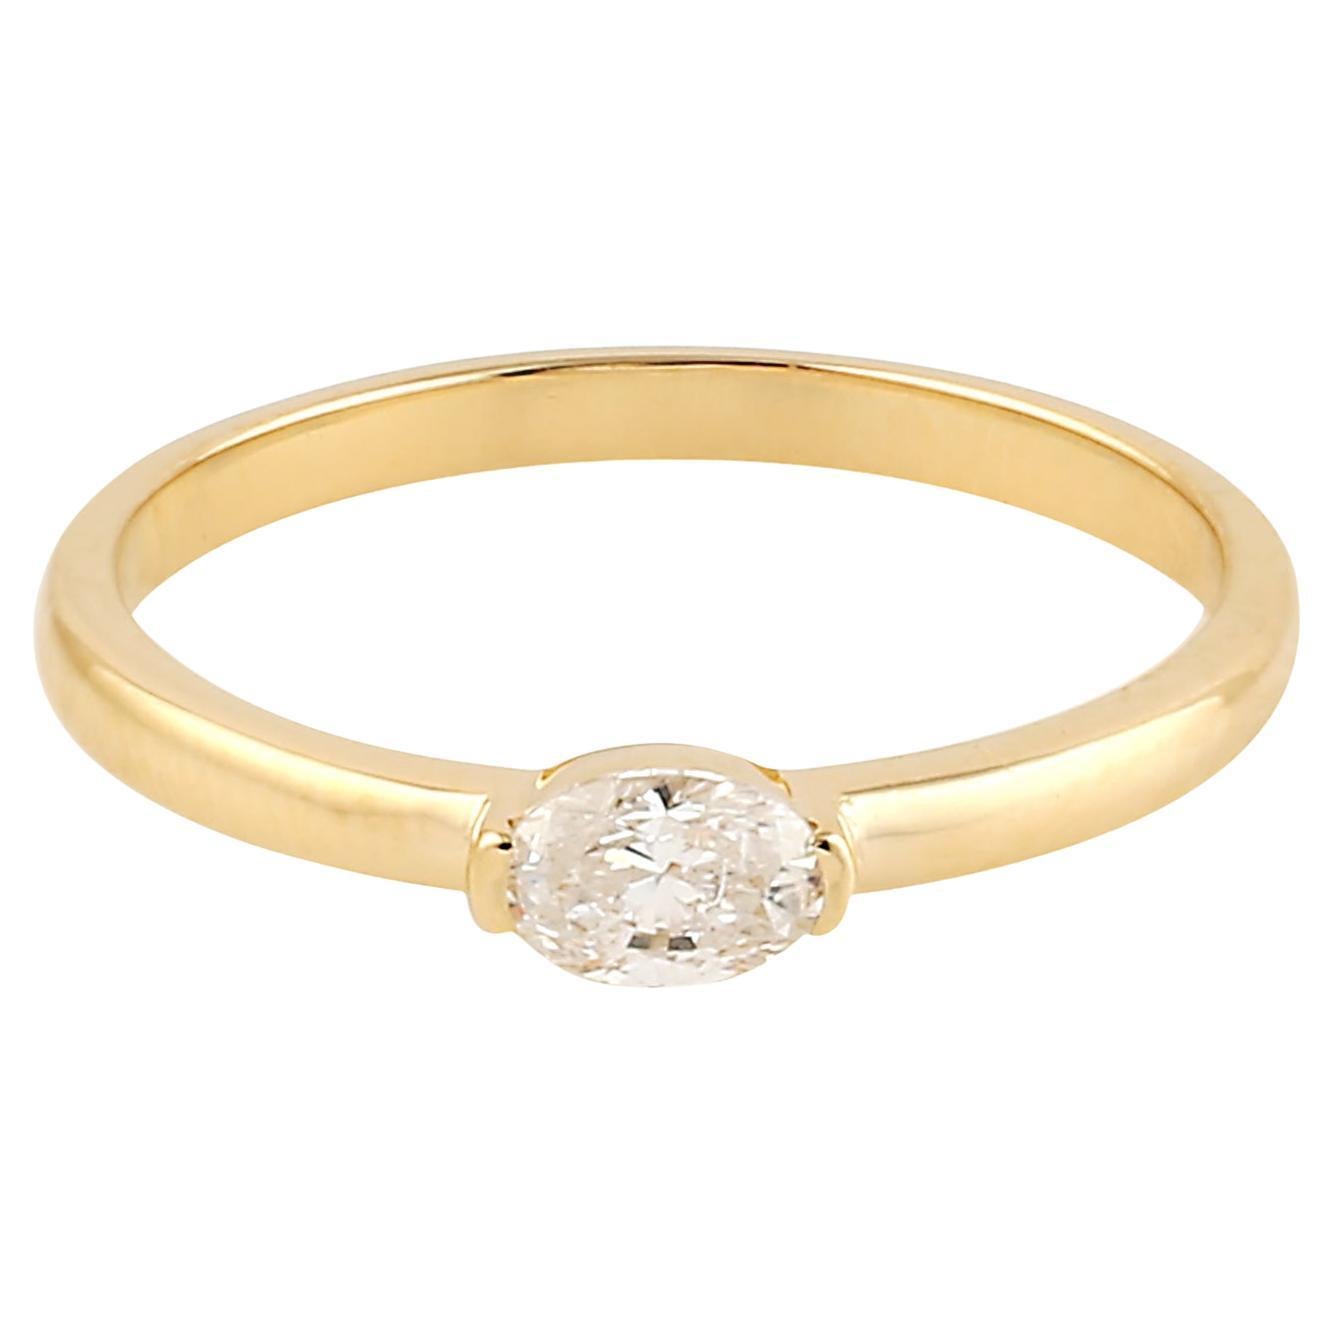 Oval Shaped Rosecut Diamonds Band Ring Made In 18k Yellow Gold